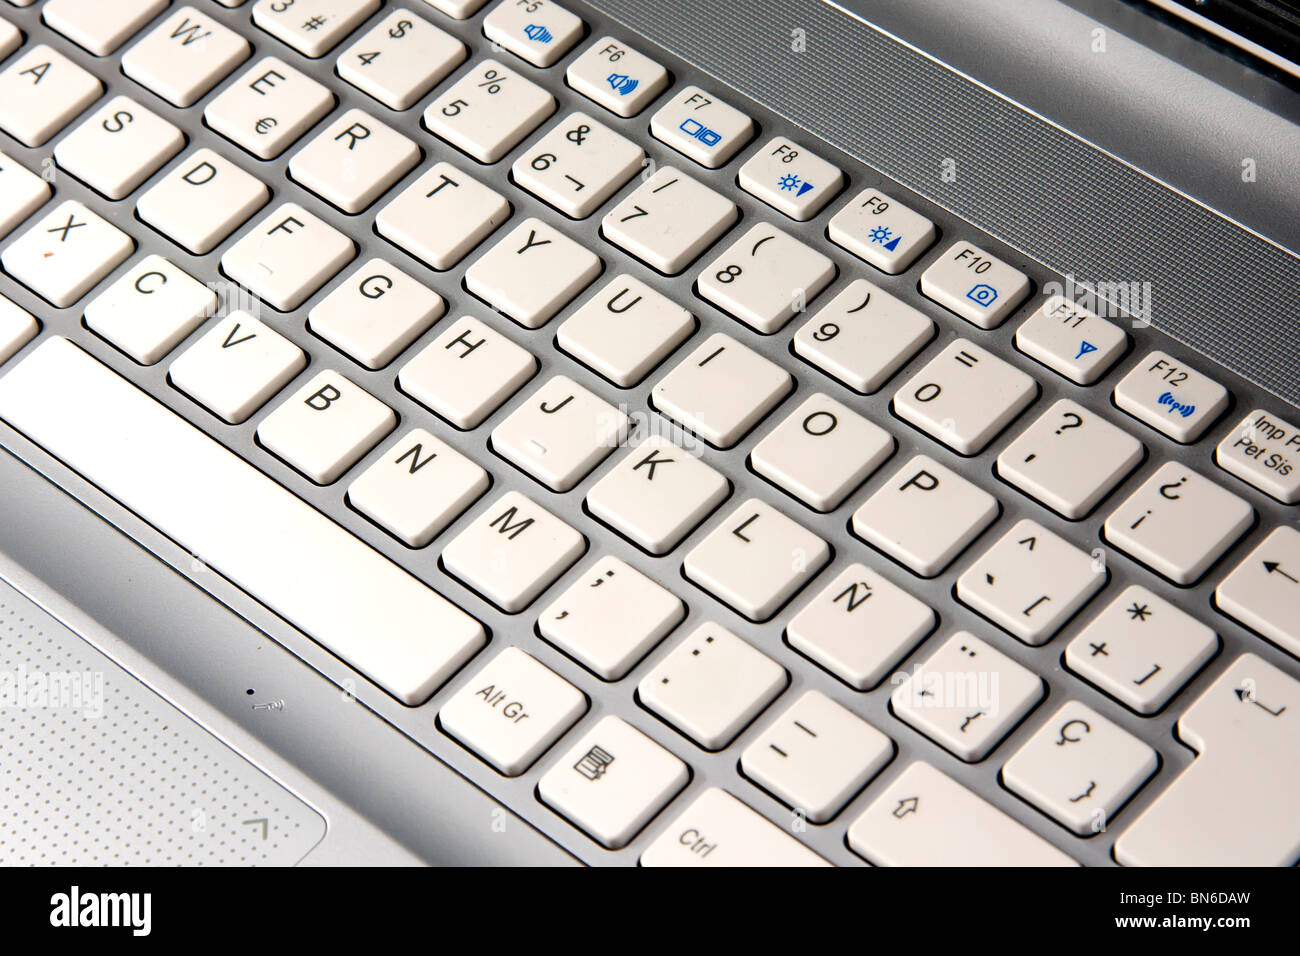 Silver notebook keyboard in a top view Stock Photo